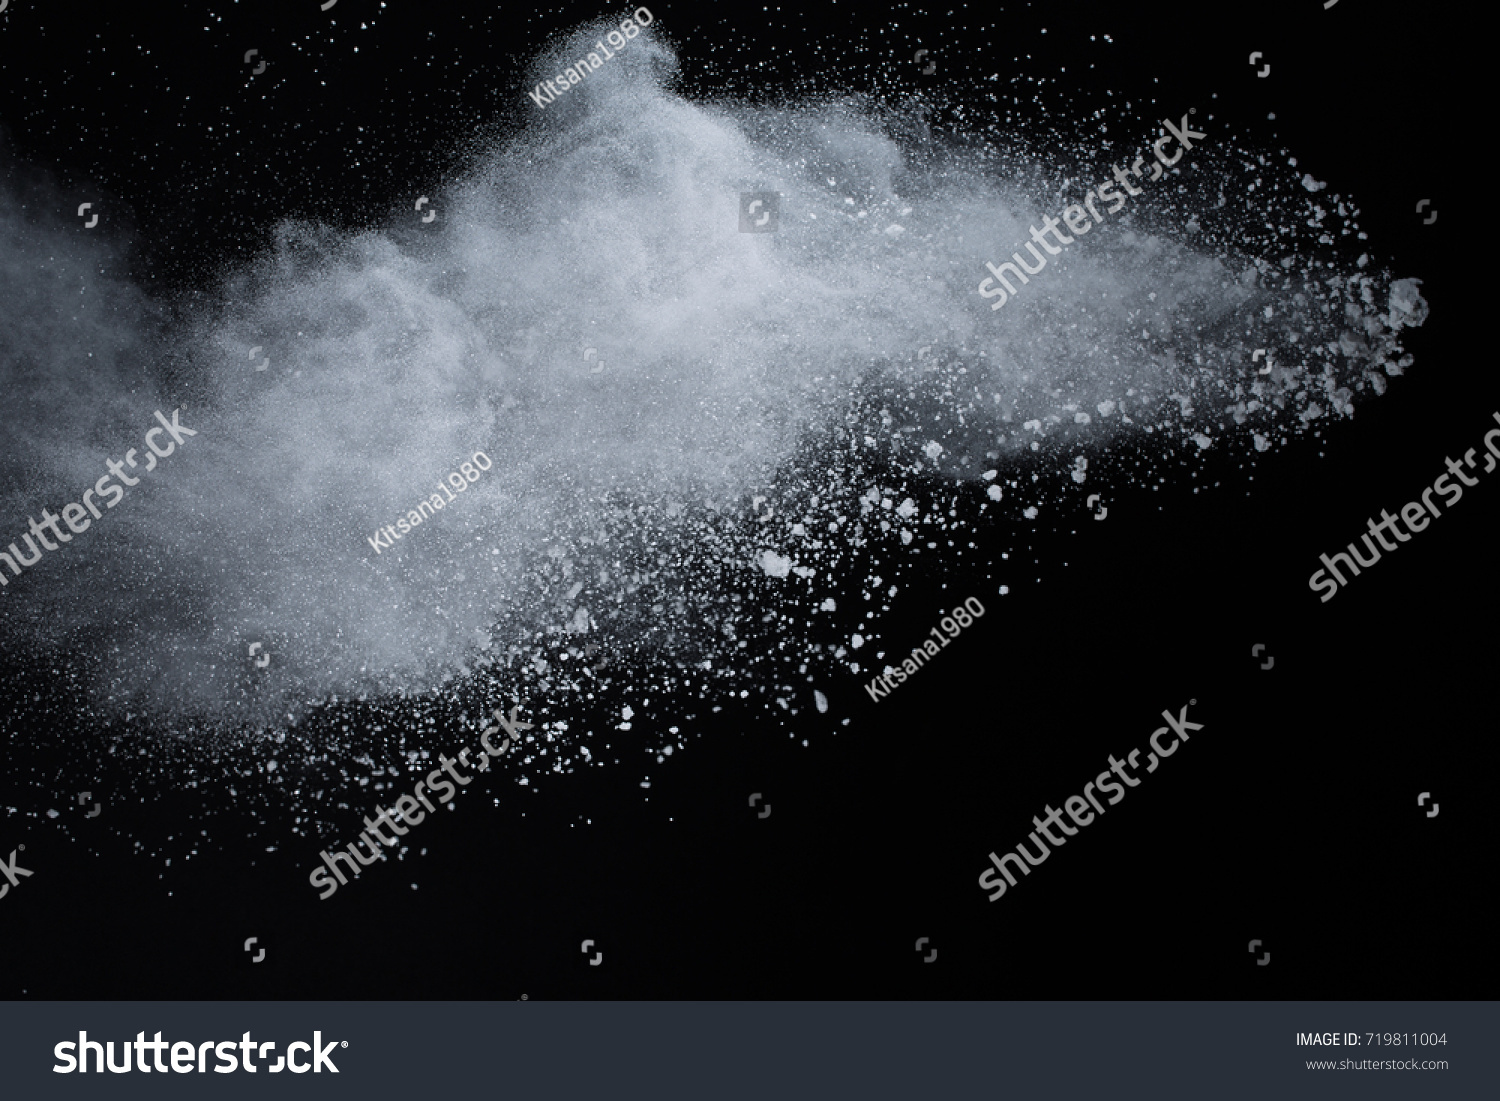 Powder explosion. Closeup of white dust particle explosion isolated on black background
 #719811004